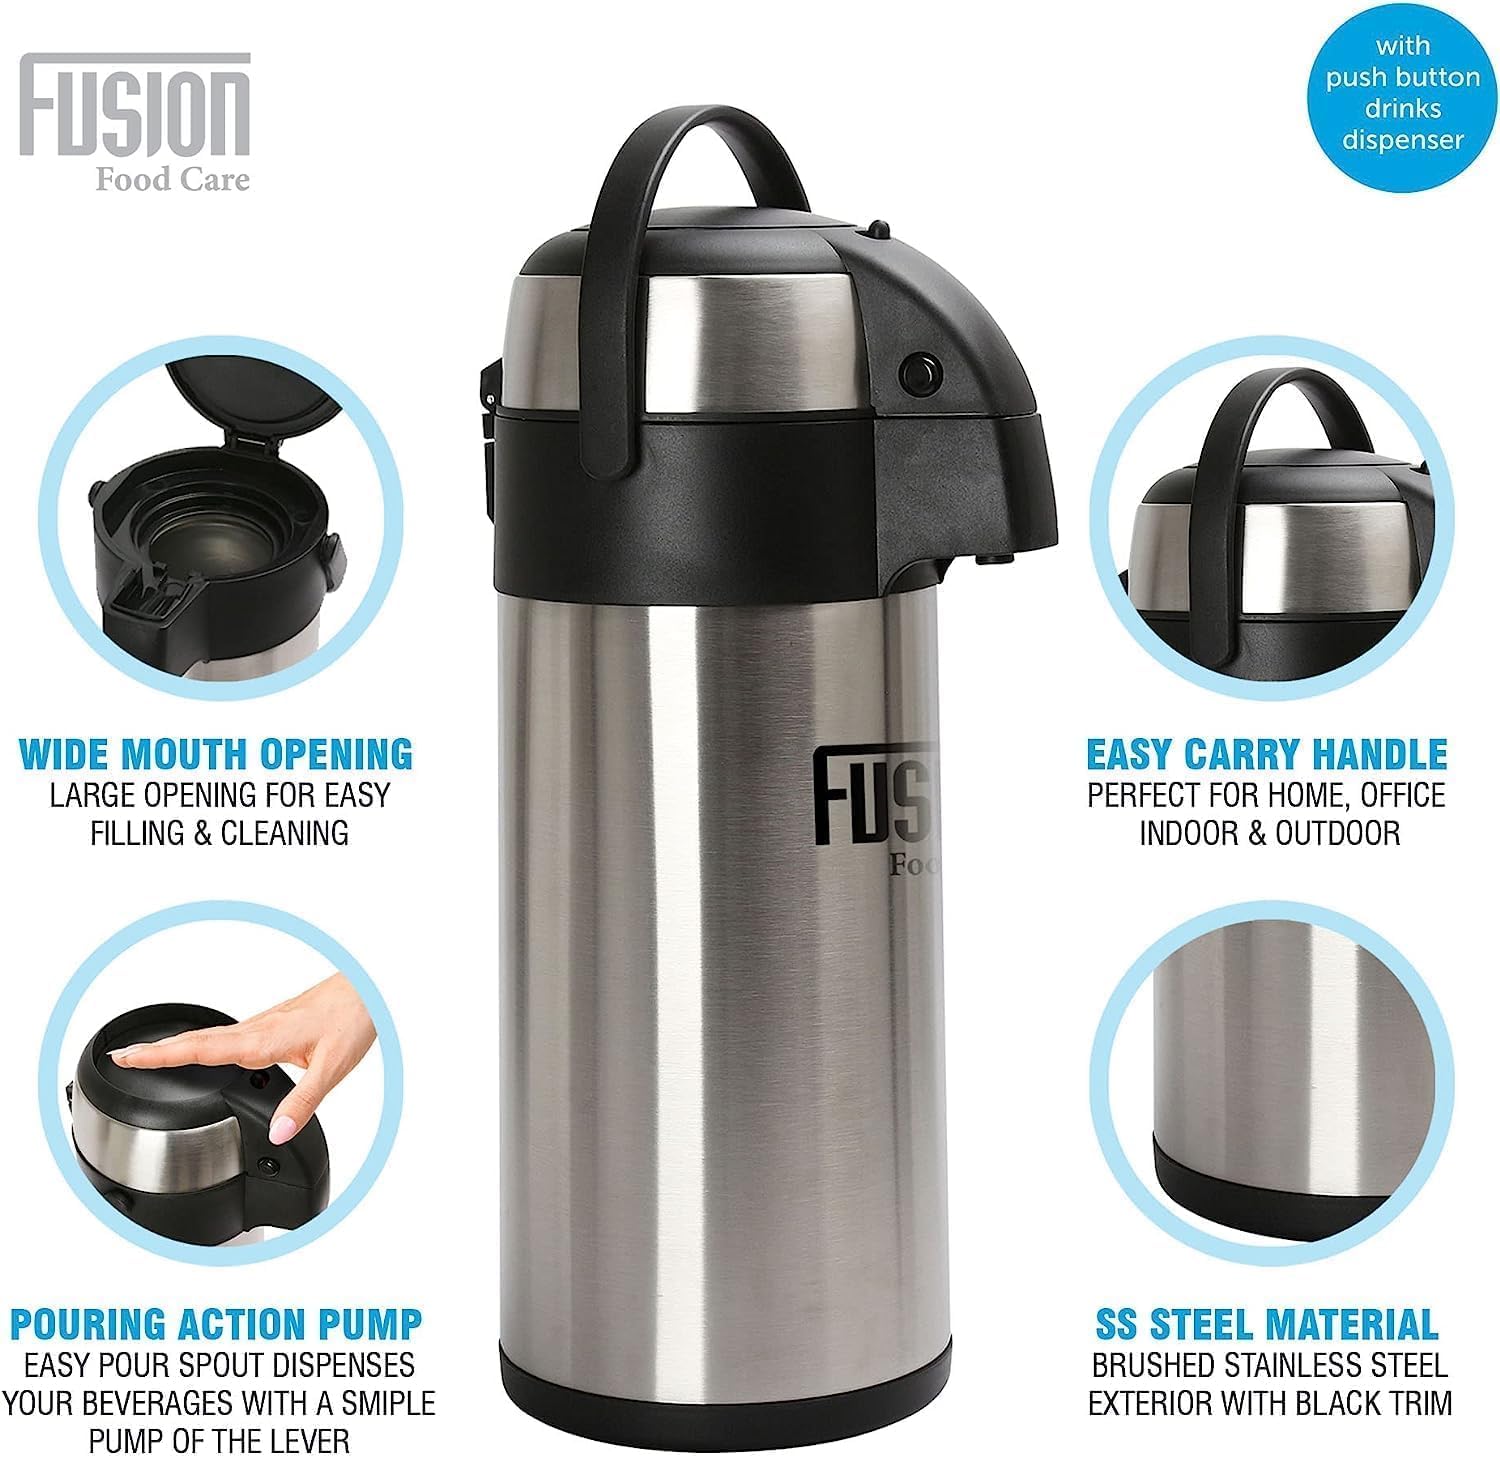 ADEPTNA Stainless Steel Double Wall Air Pot Hot Tea Coffee Drinks Vacuum Insulated Flask Pump Action - Safety Lock and Carry Handle (3L Capacity)